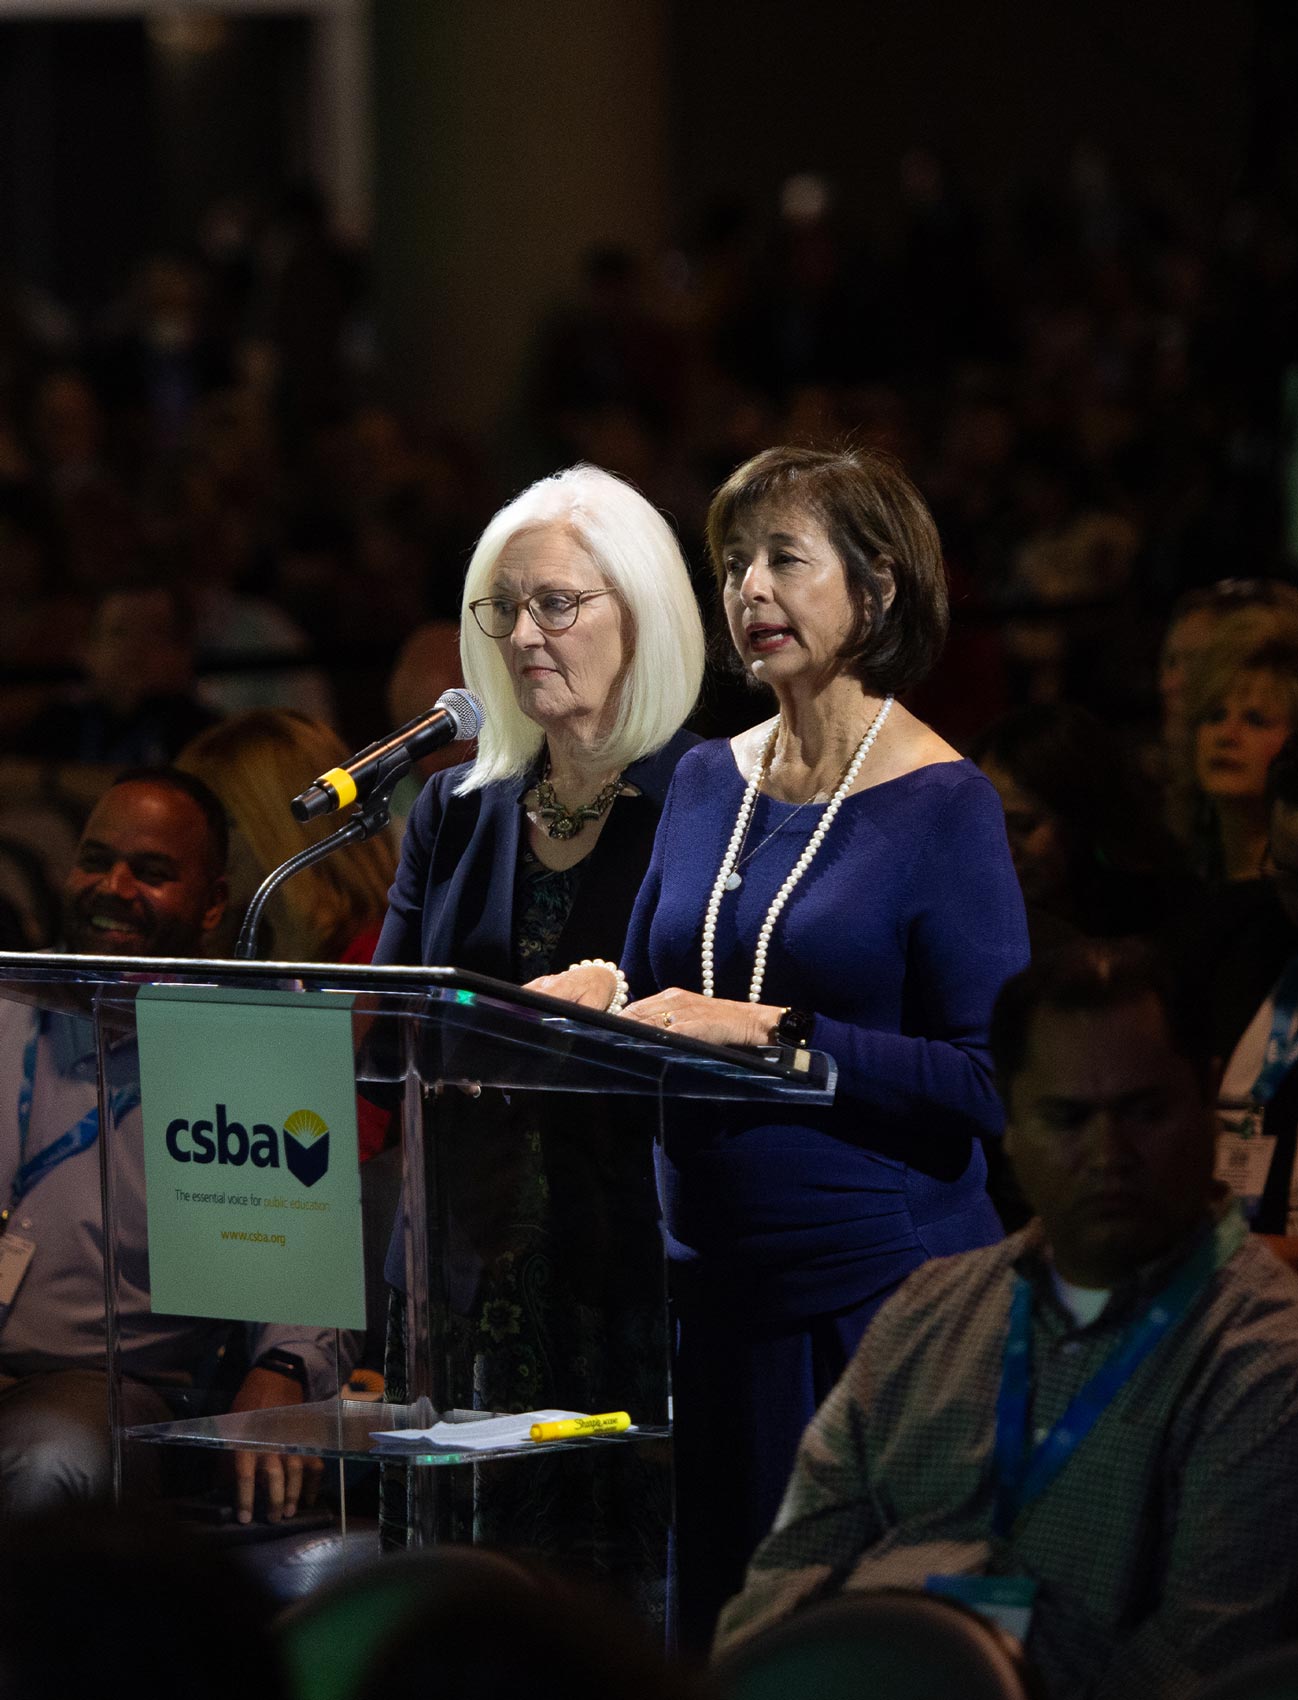 CSBA President-elect Susan Markarian and CSBA President Dr. Susan Heredia address the crowd and media outlets during the media event